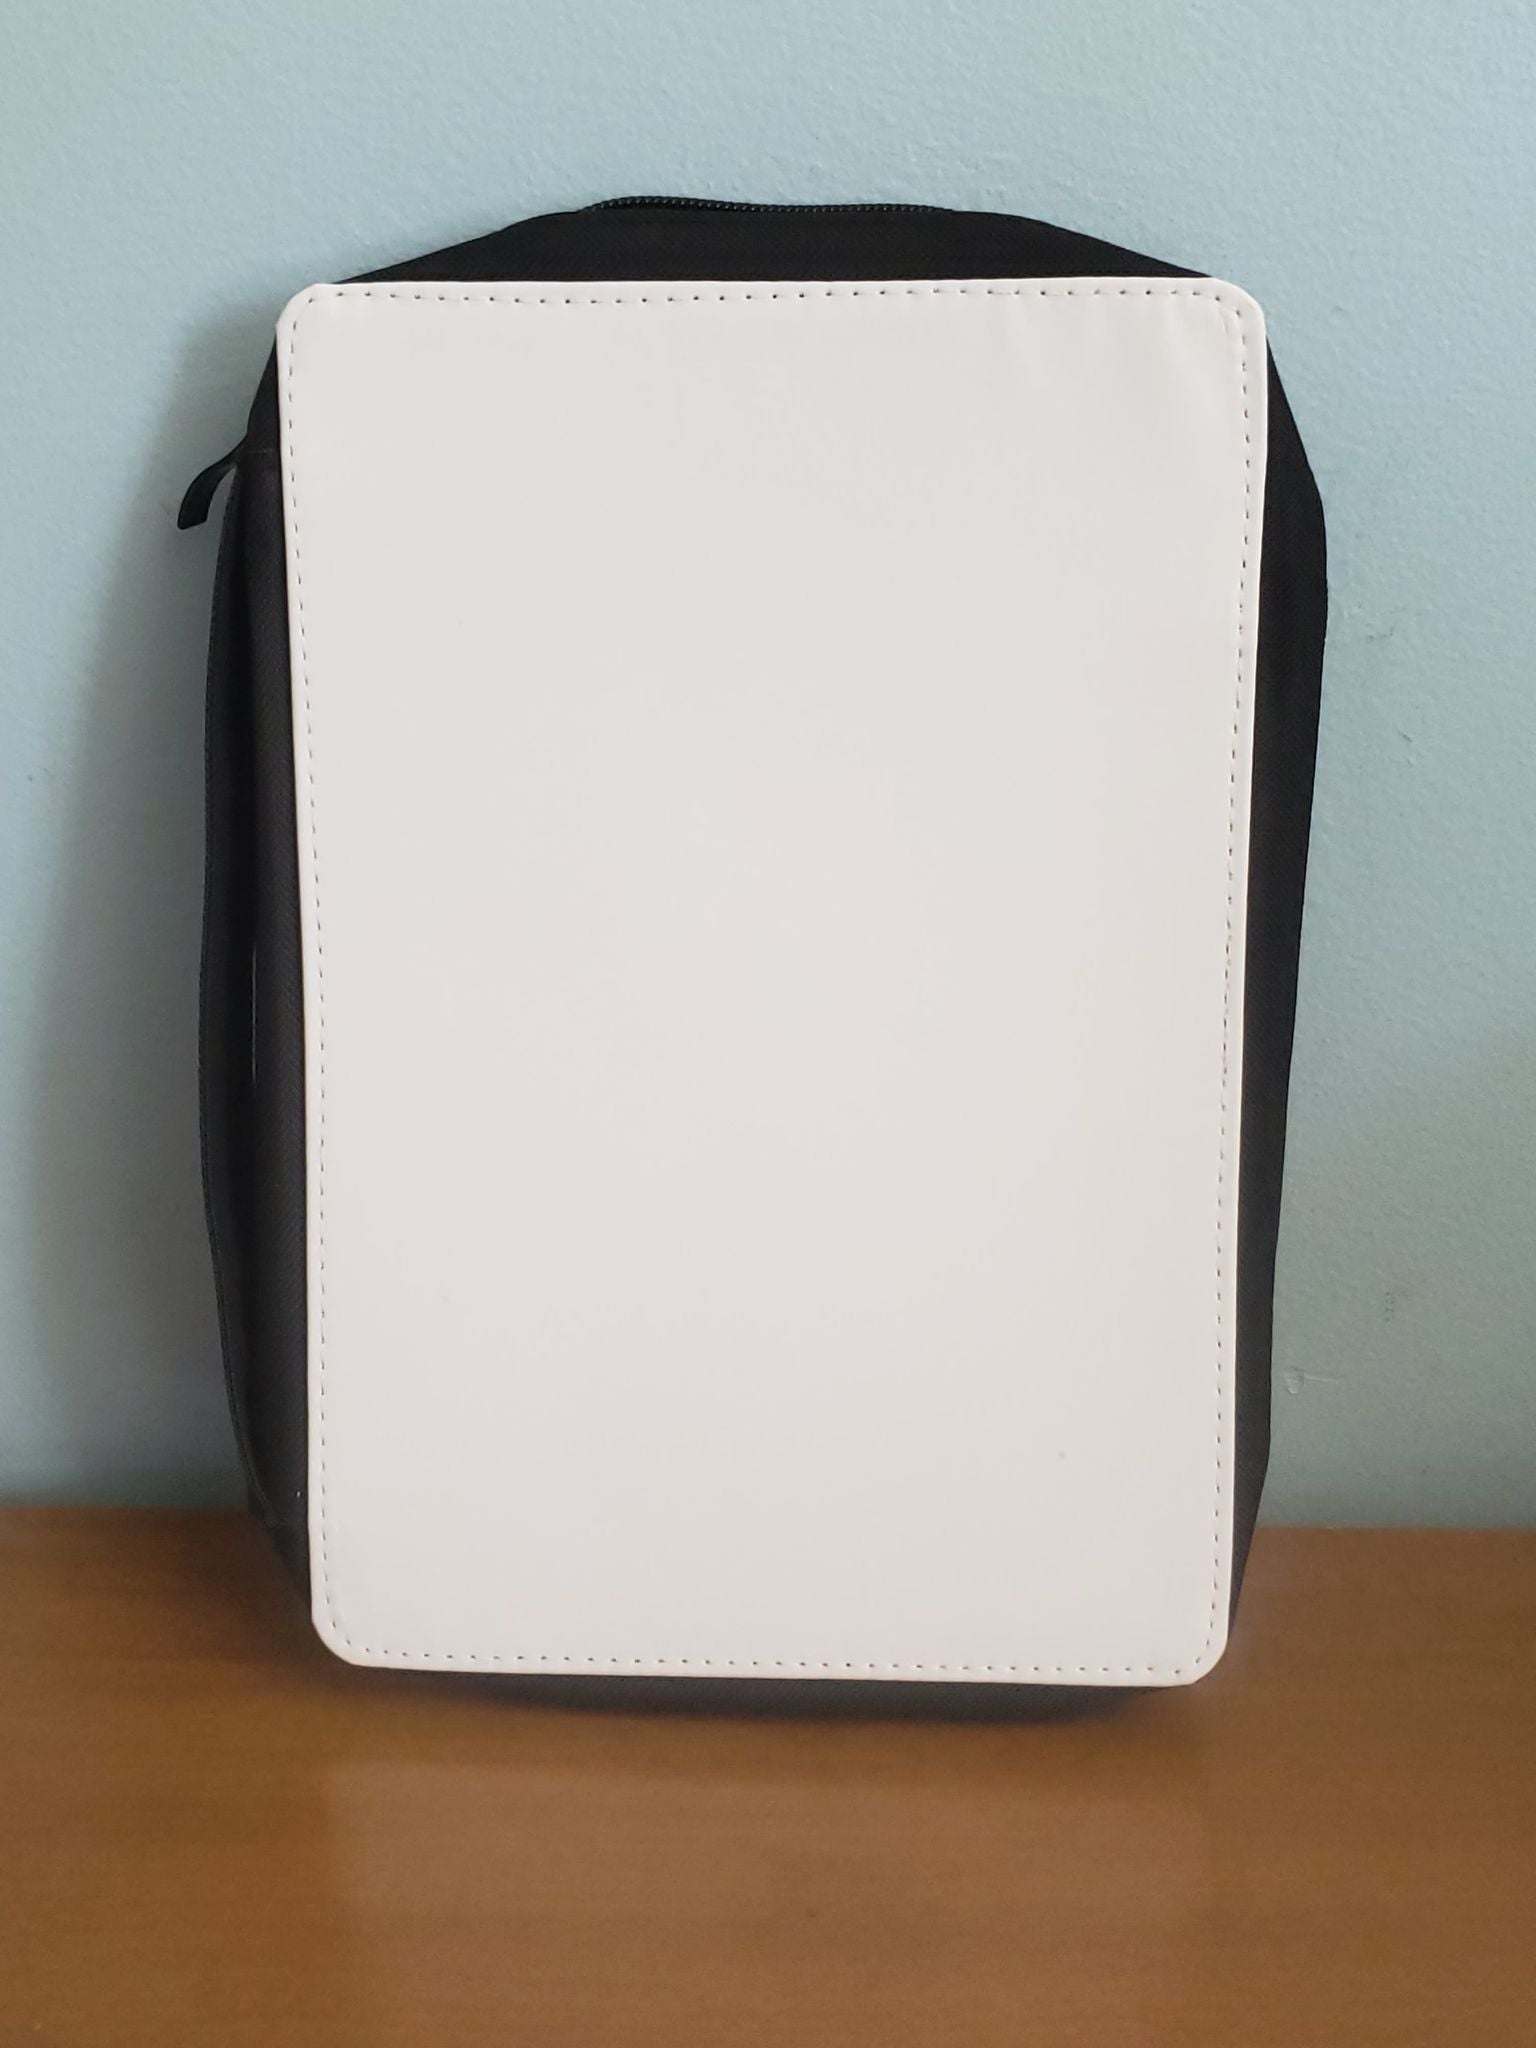 Sublimation Blank Luggage Cover